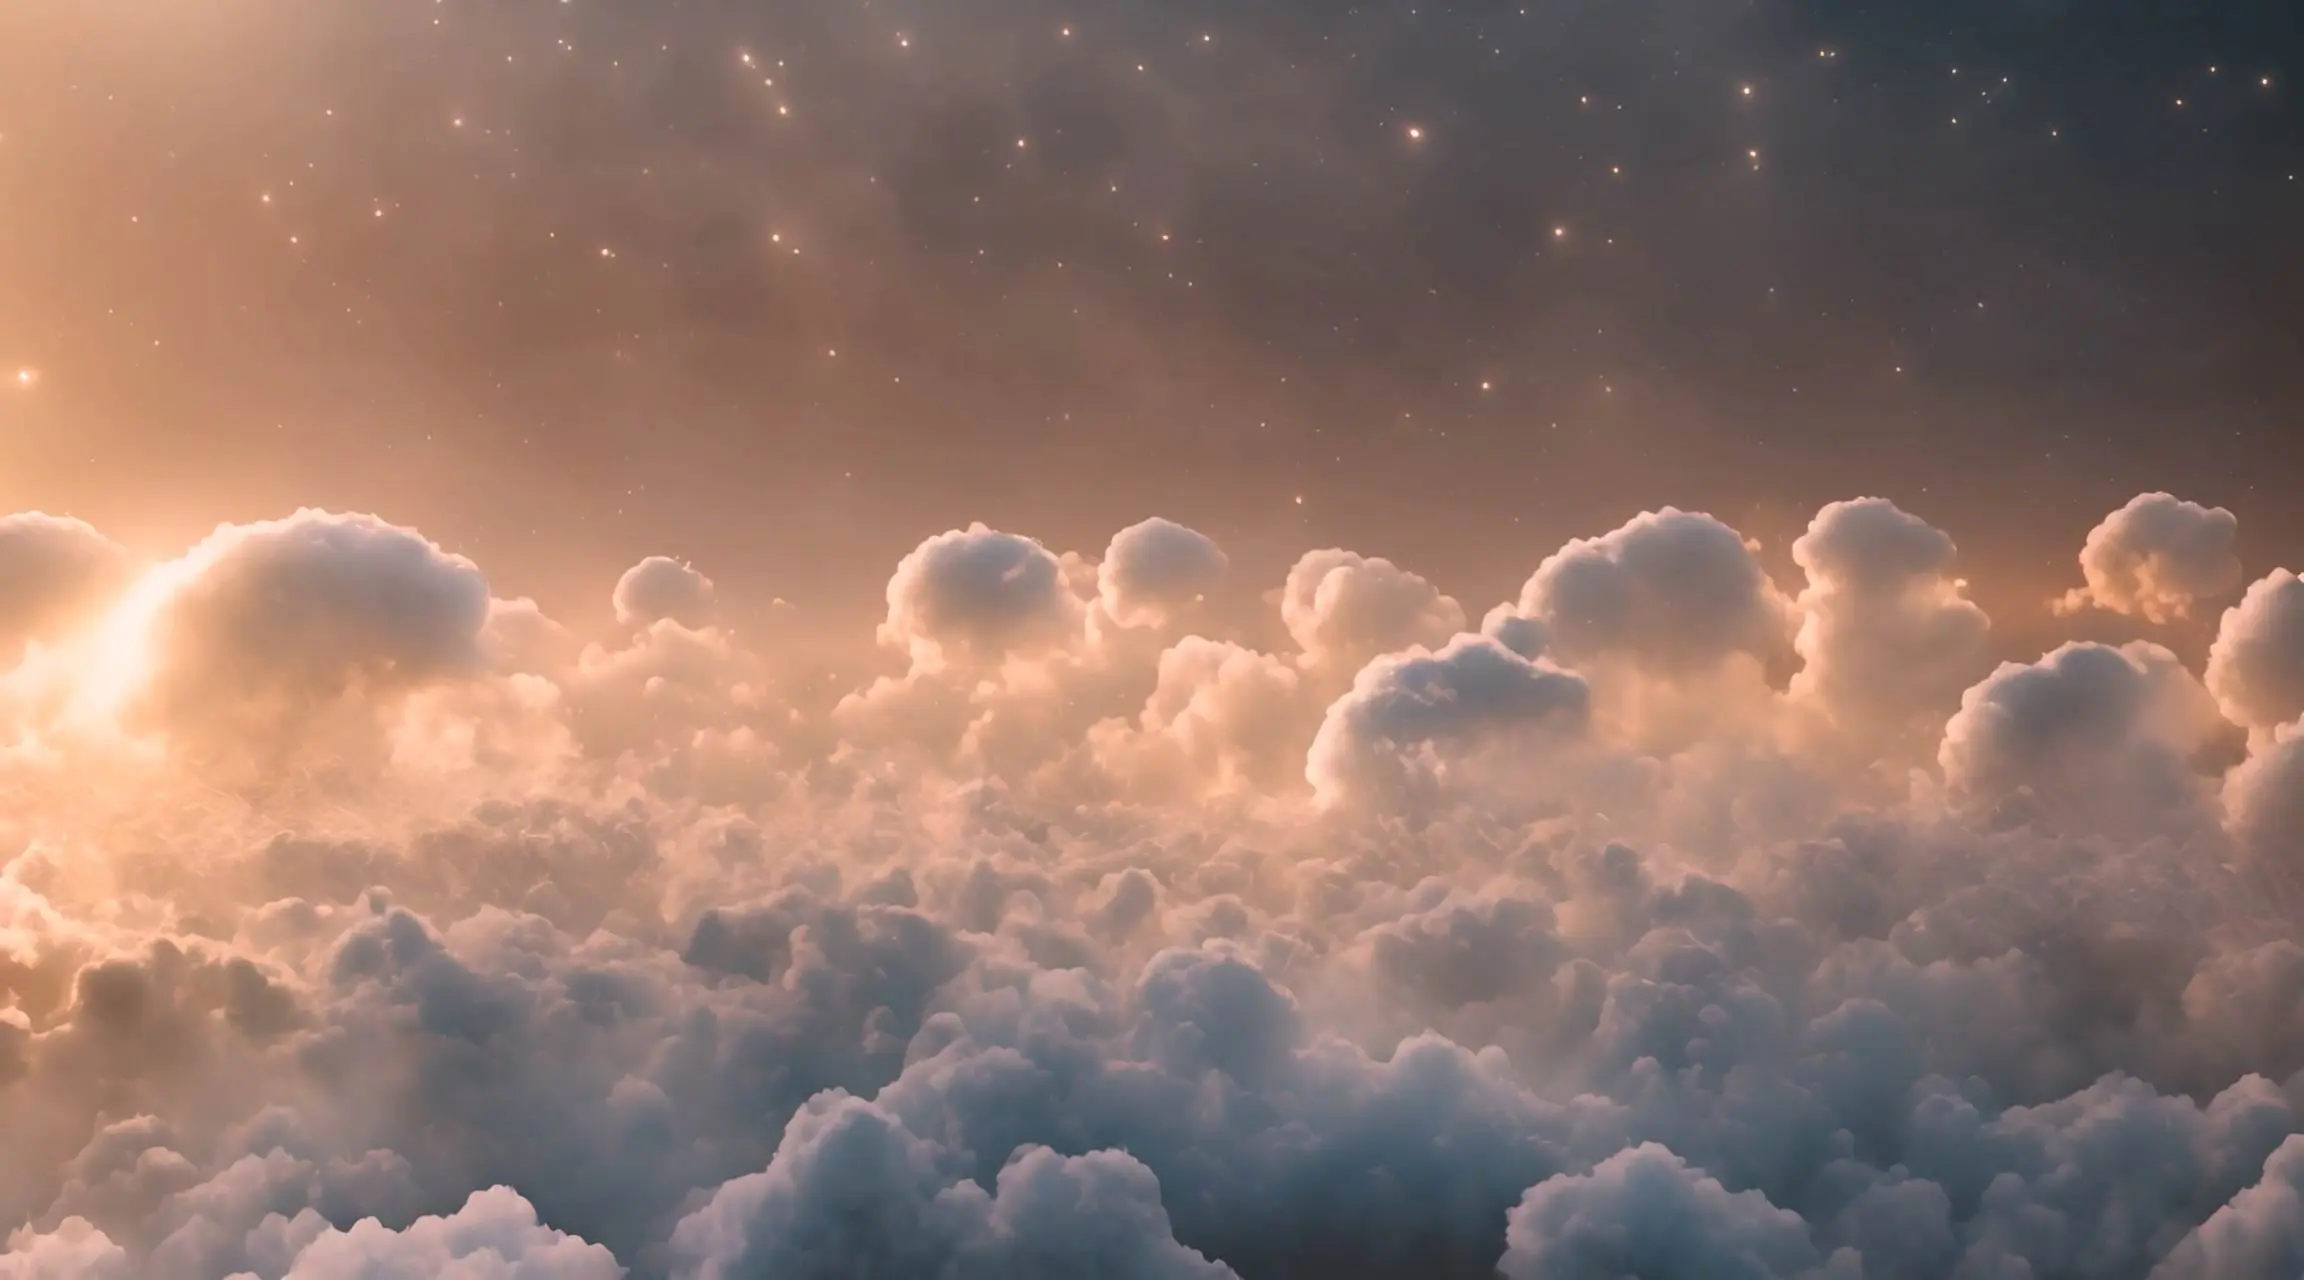 Mystical Clouds and Stars Background Footage